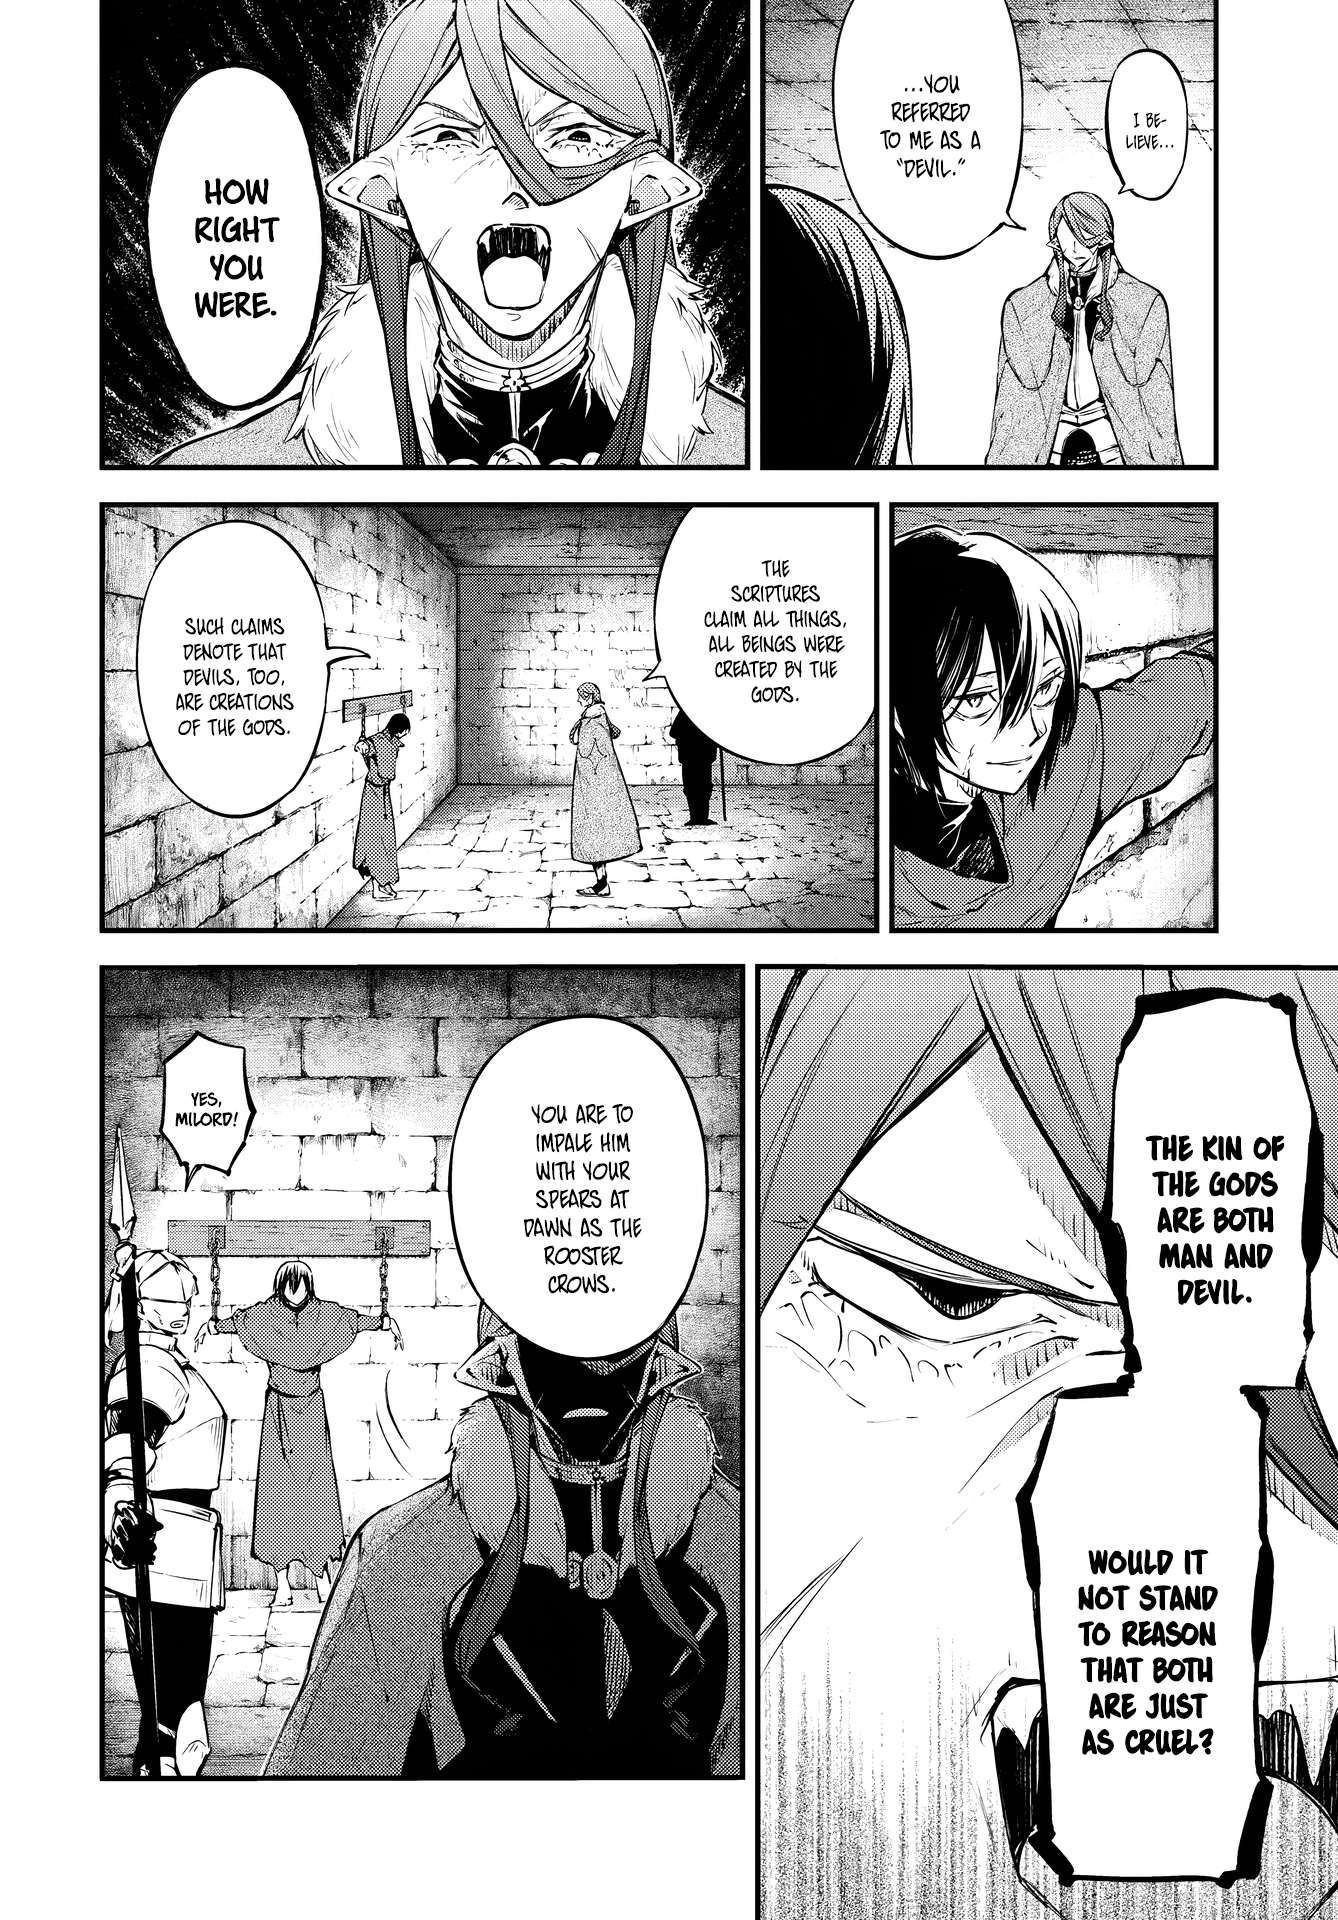 Bungo Stray Dogs chapter 113 page 20